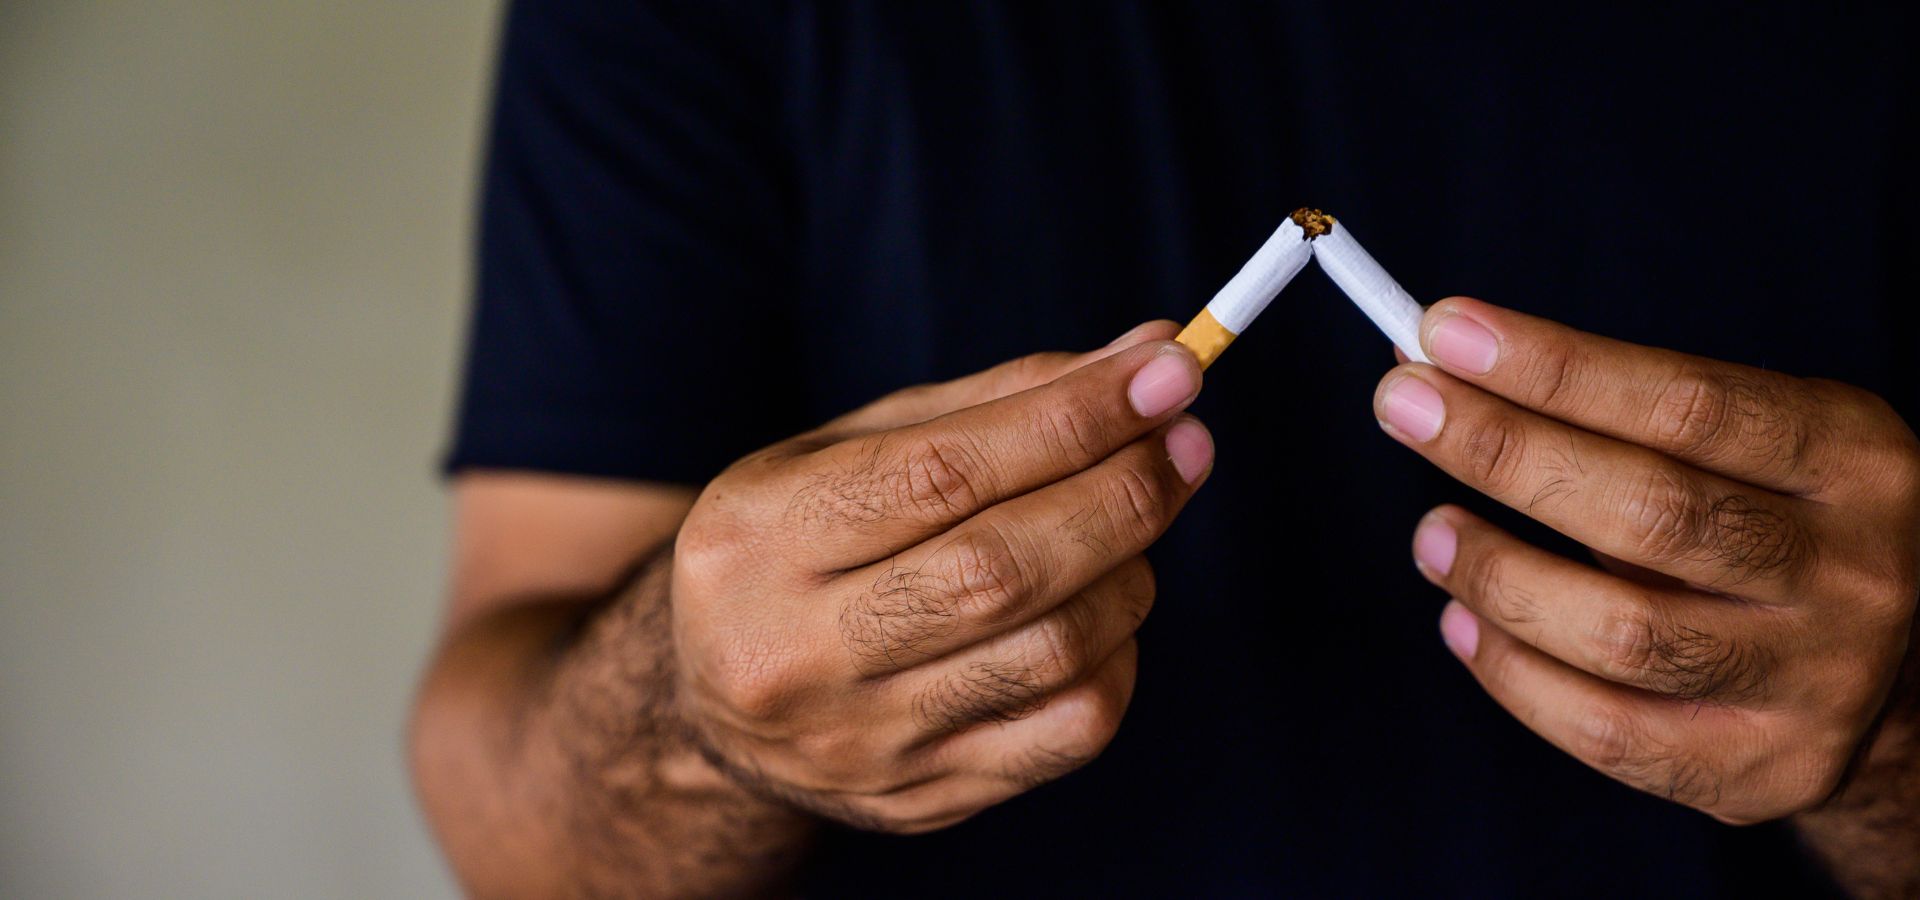 Do You Want to Quit Smoking? MetroHealth Can Help.